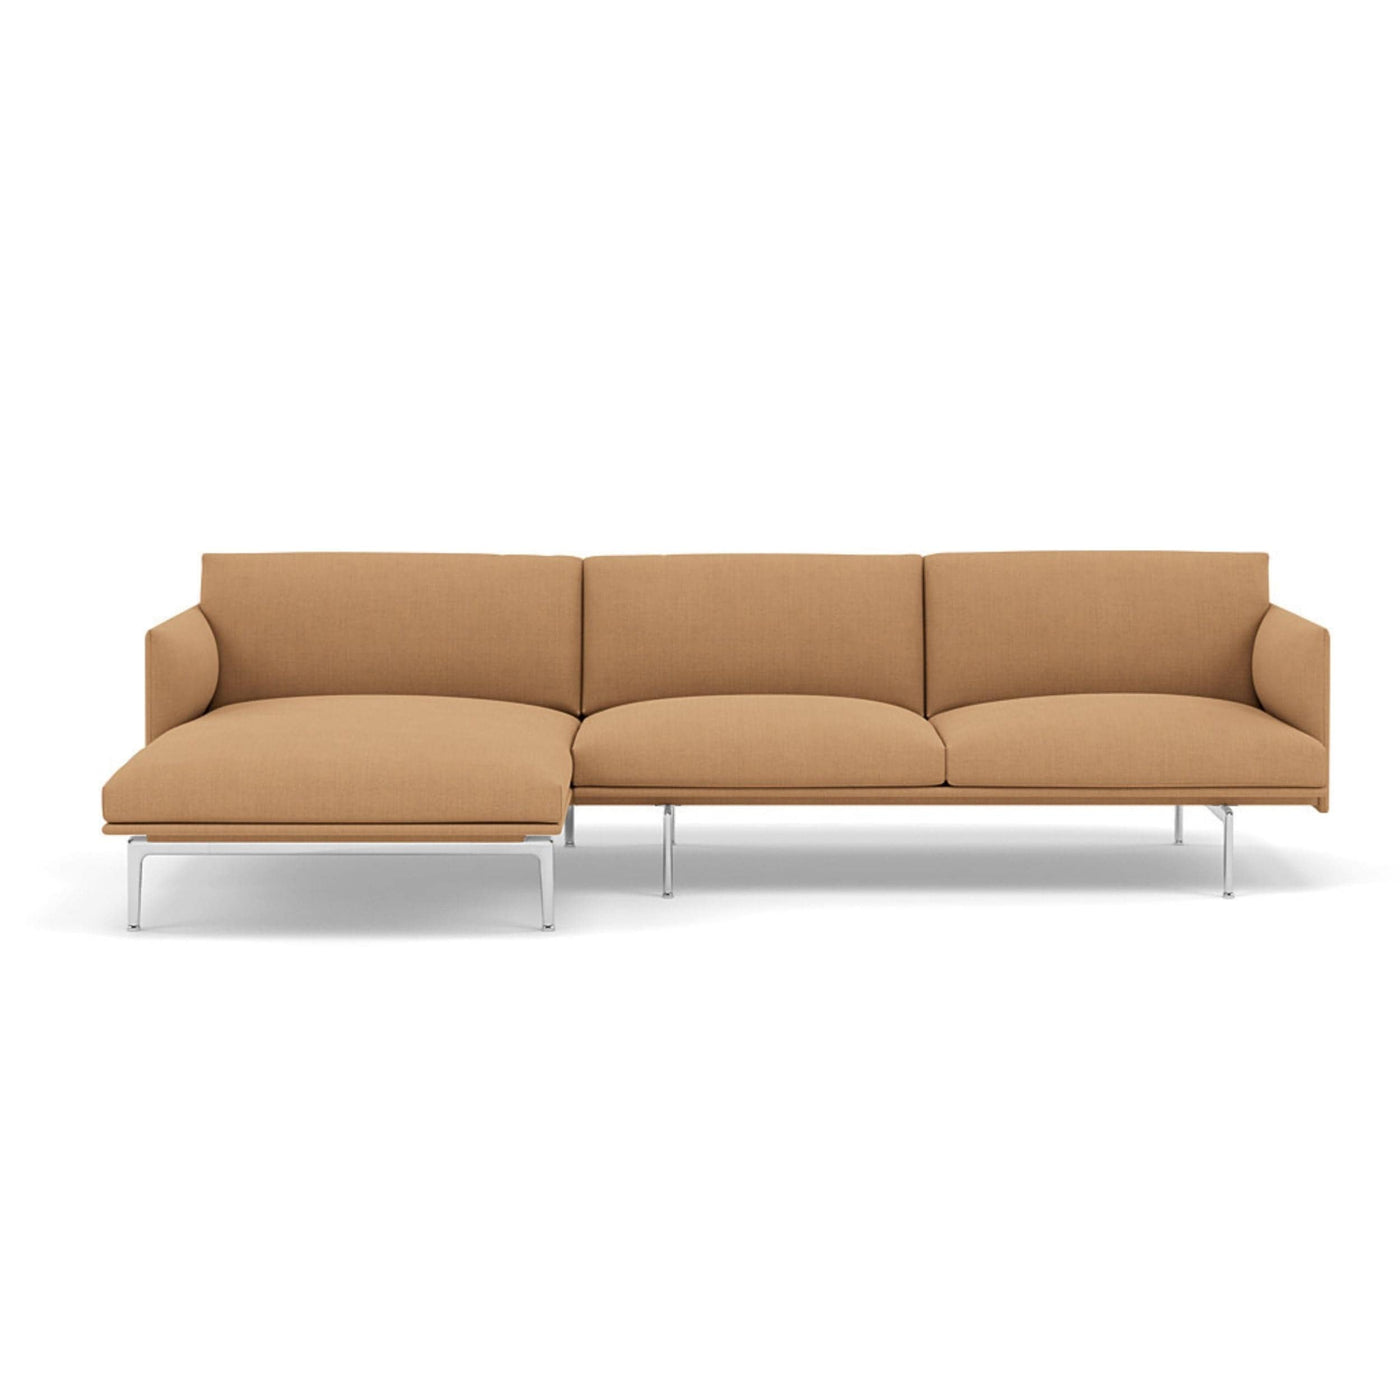 Muuto Outline Chaise Longue sofa in fiord 451. Made to order from someday designs. #colour_fiord-451